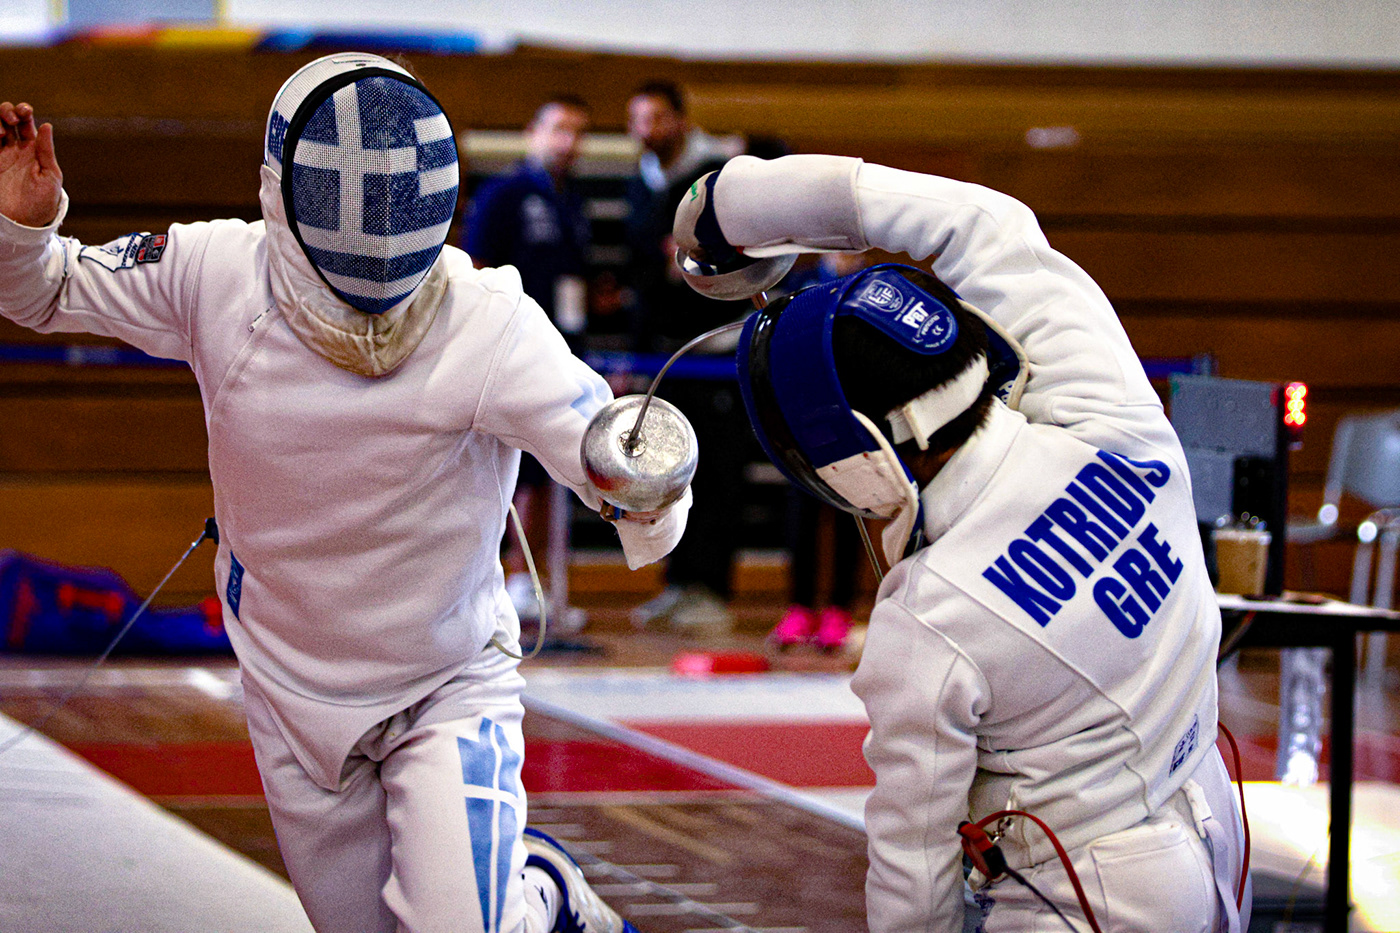 epee fencing escrime sports Competition cup